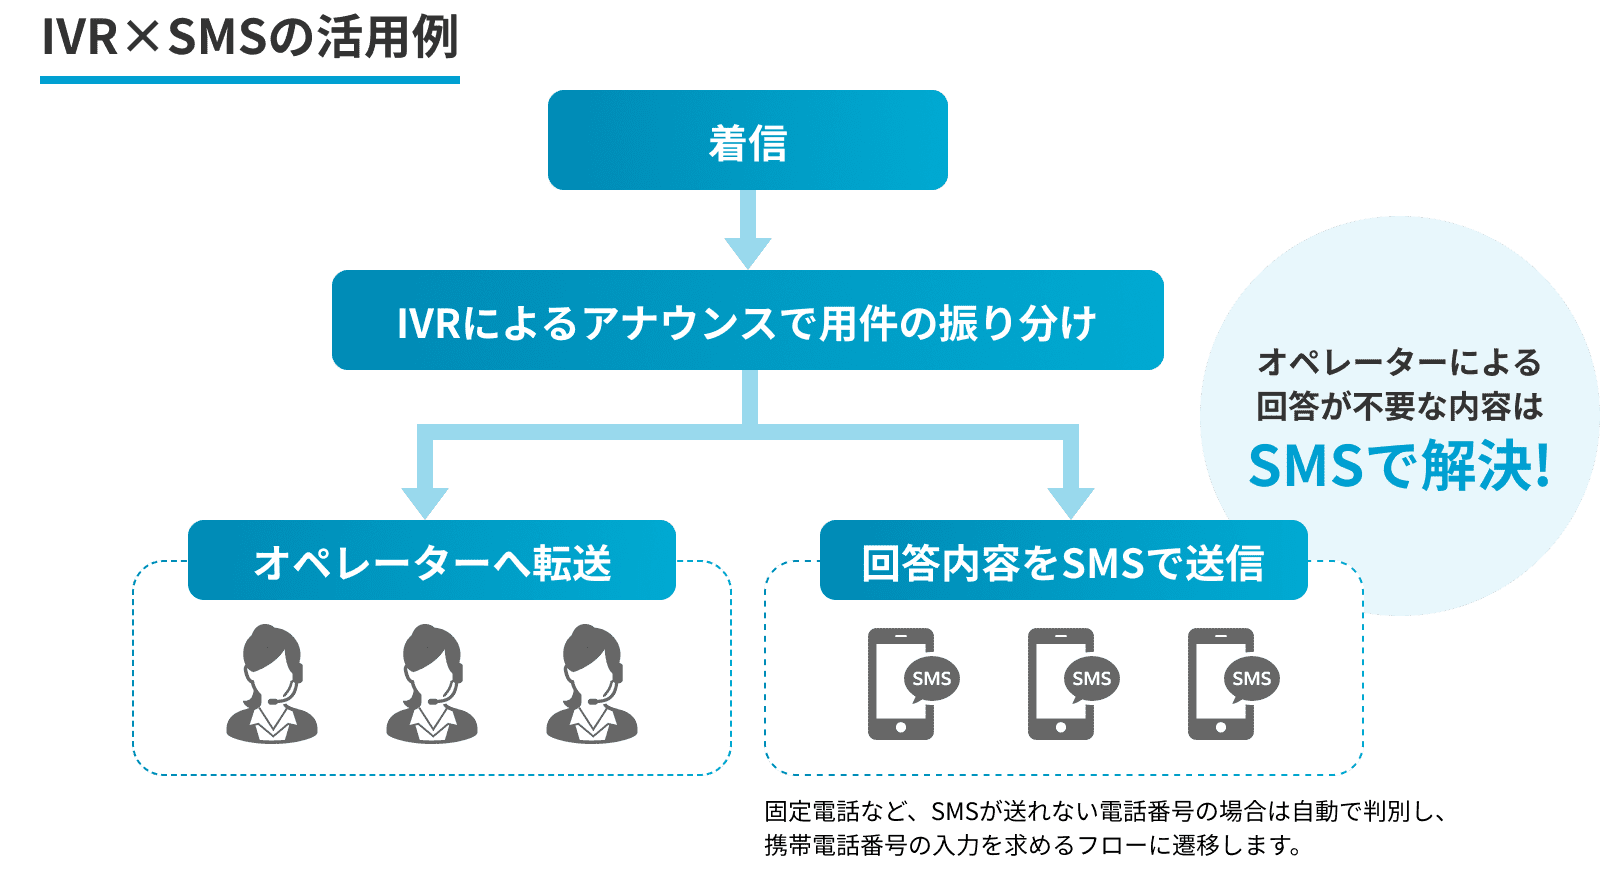 IVR×SMSの活用例